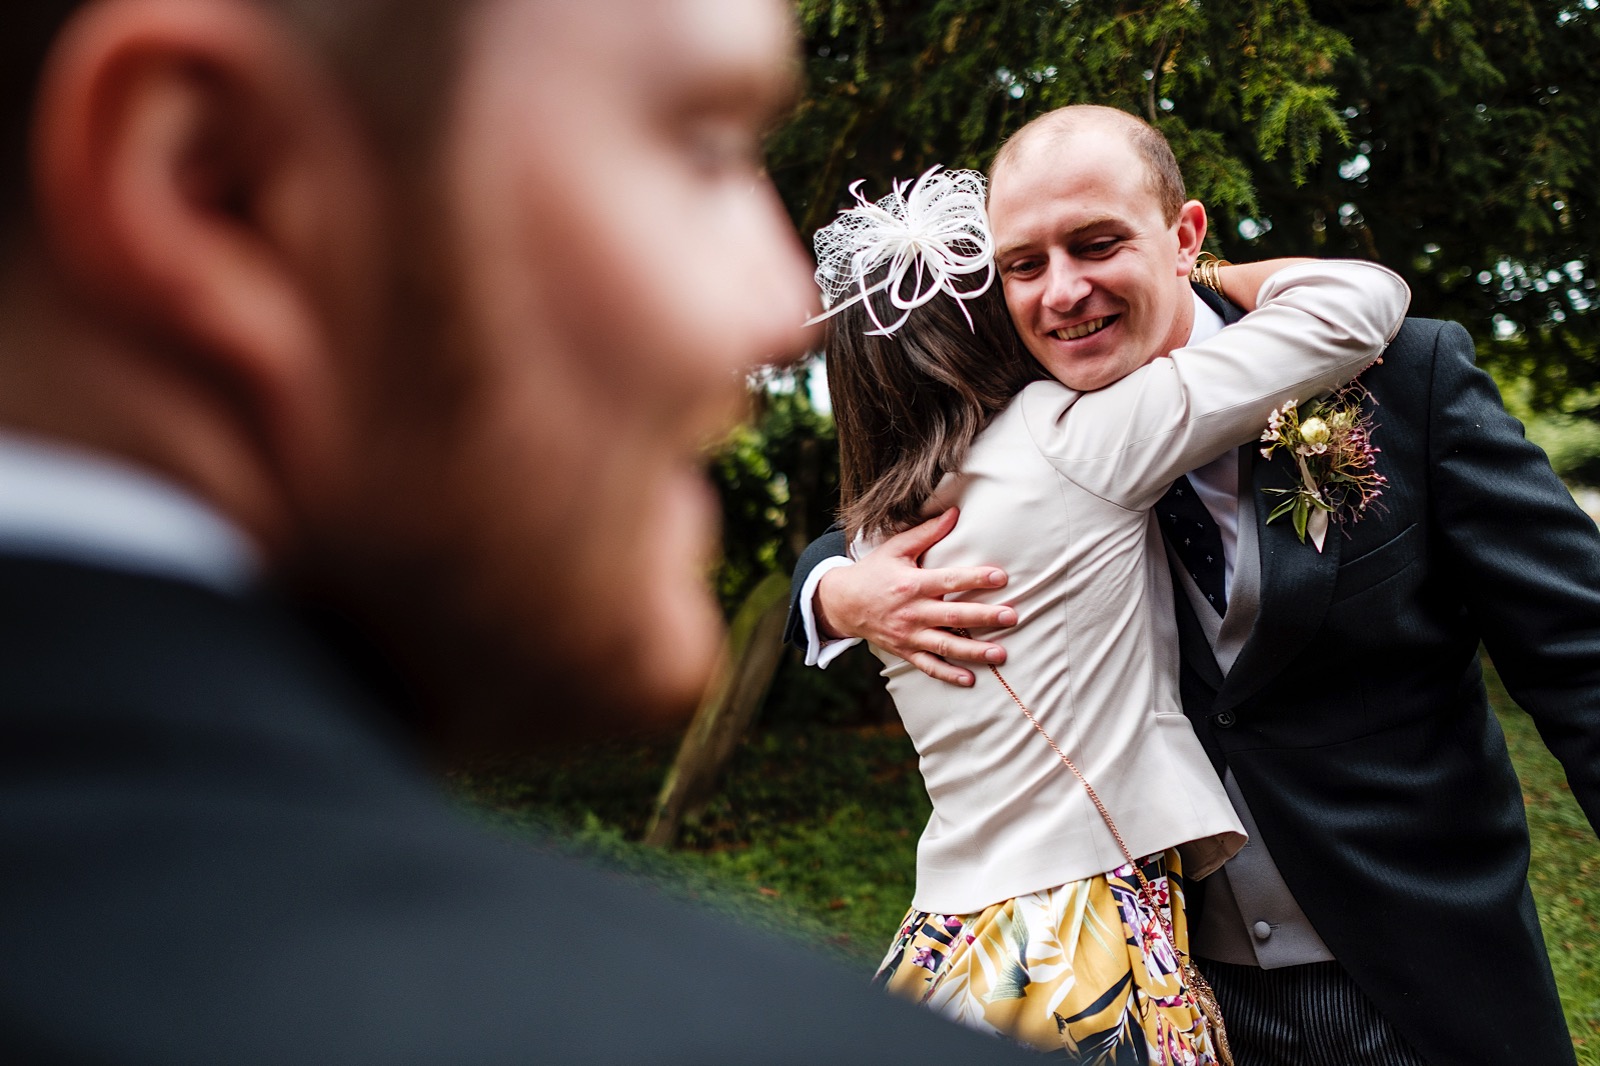 Street Photography influenced photograph of a guest hugging another guest, using the side of an ushers face to frame the moment